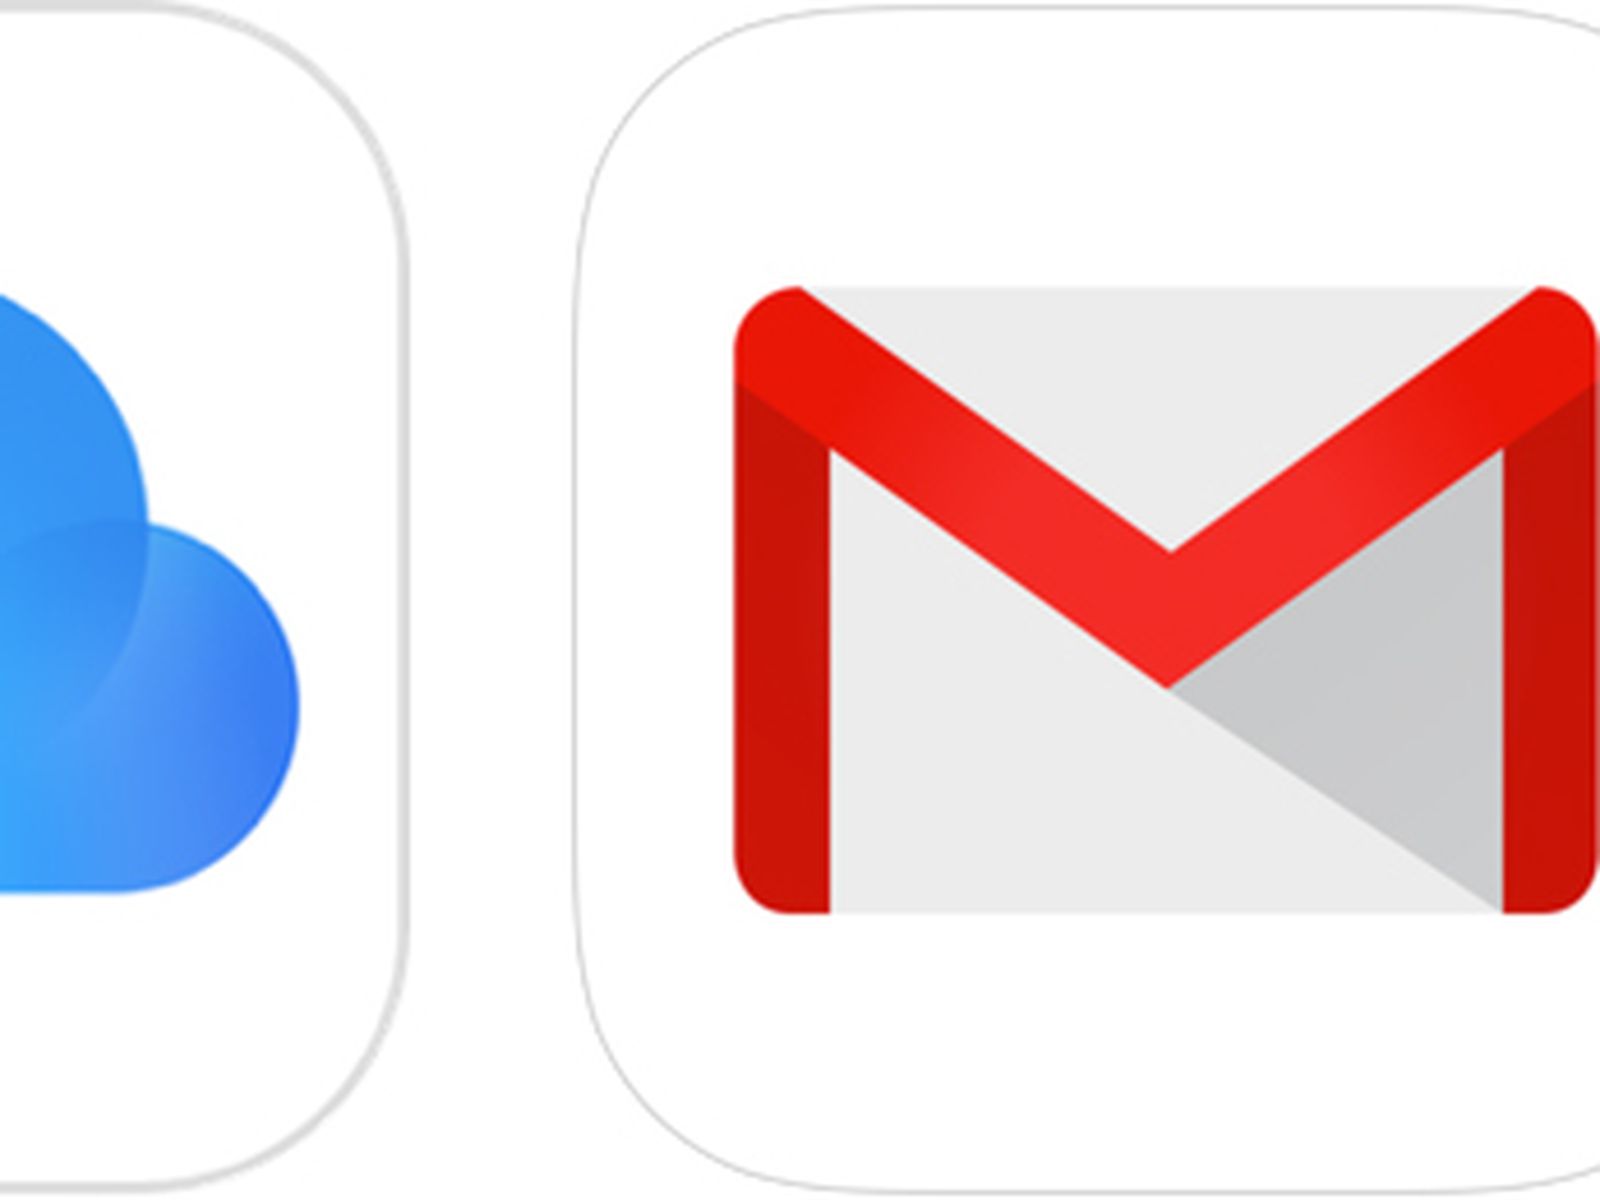 show only current email from contact in gmail on mac